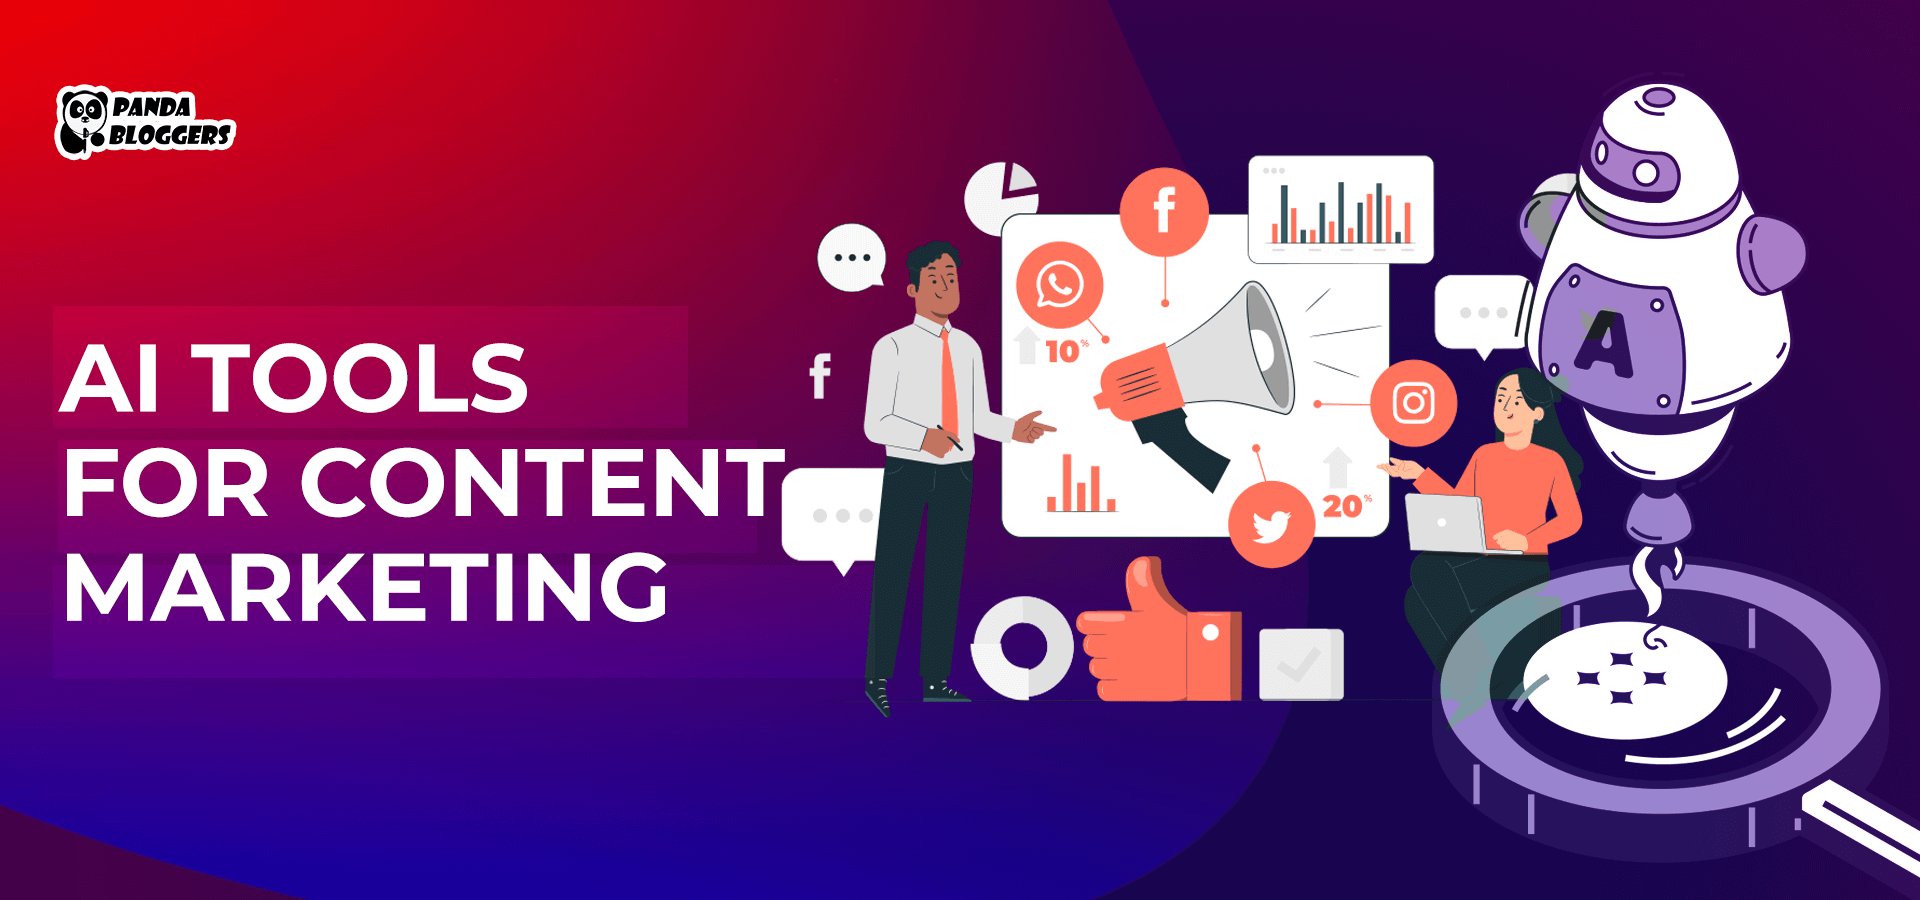 AI Tools for Content Marketing